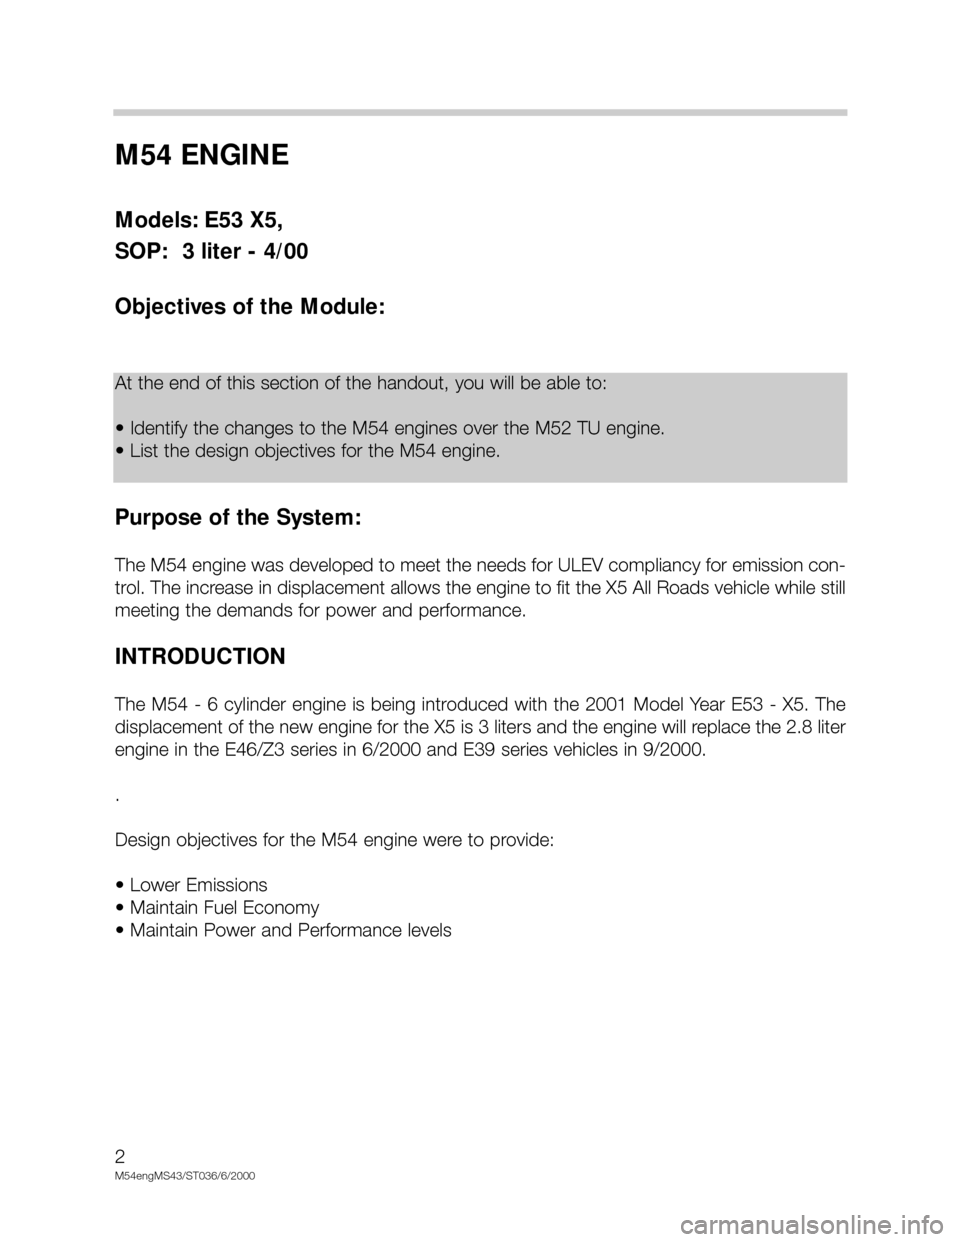 BMW X5 2003 E53 M54 Engine Workshop Manual M54 ENGINE 
Models: E53 X5, 
SOP:  3 liter - 4/00
Objectives of the Module:
Purpose of the System:
The M54 engine was developed to meet the needs for ULEV compliancy for emission con-
trol. The increa